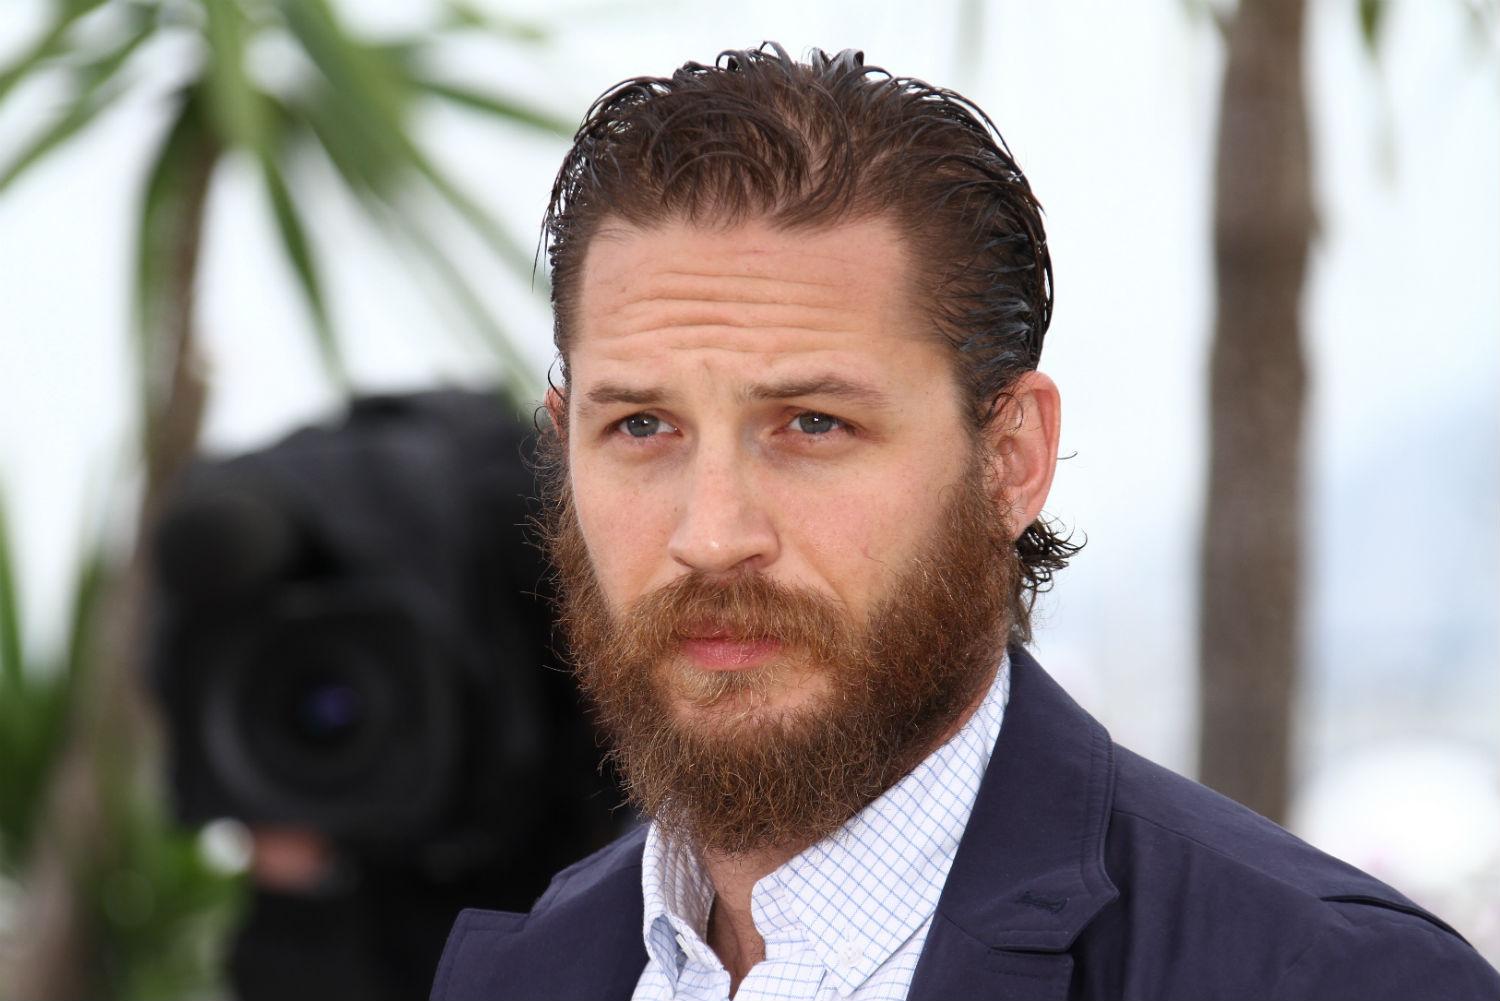 Tom Hardy Backgrounds, Compatible - PC, Mobile, Gadgets| 1500x1001 px